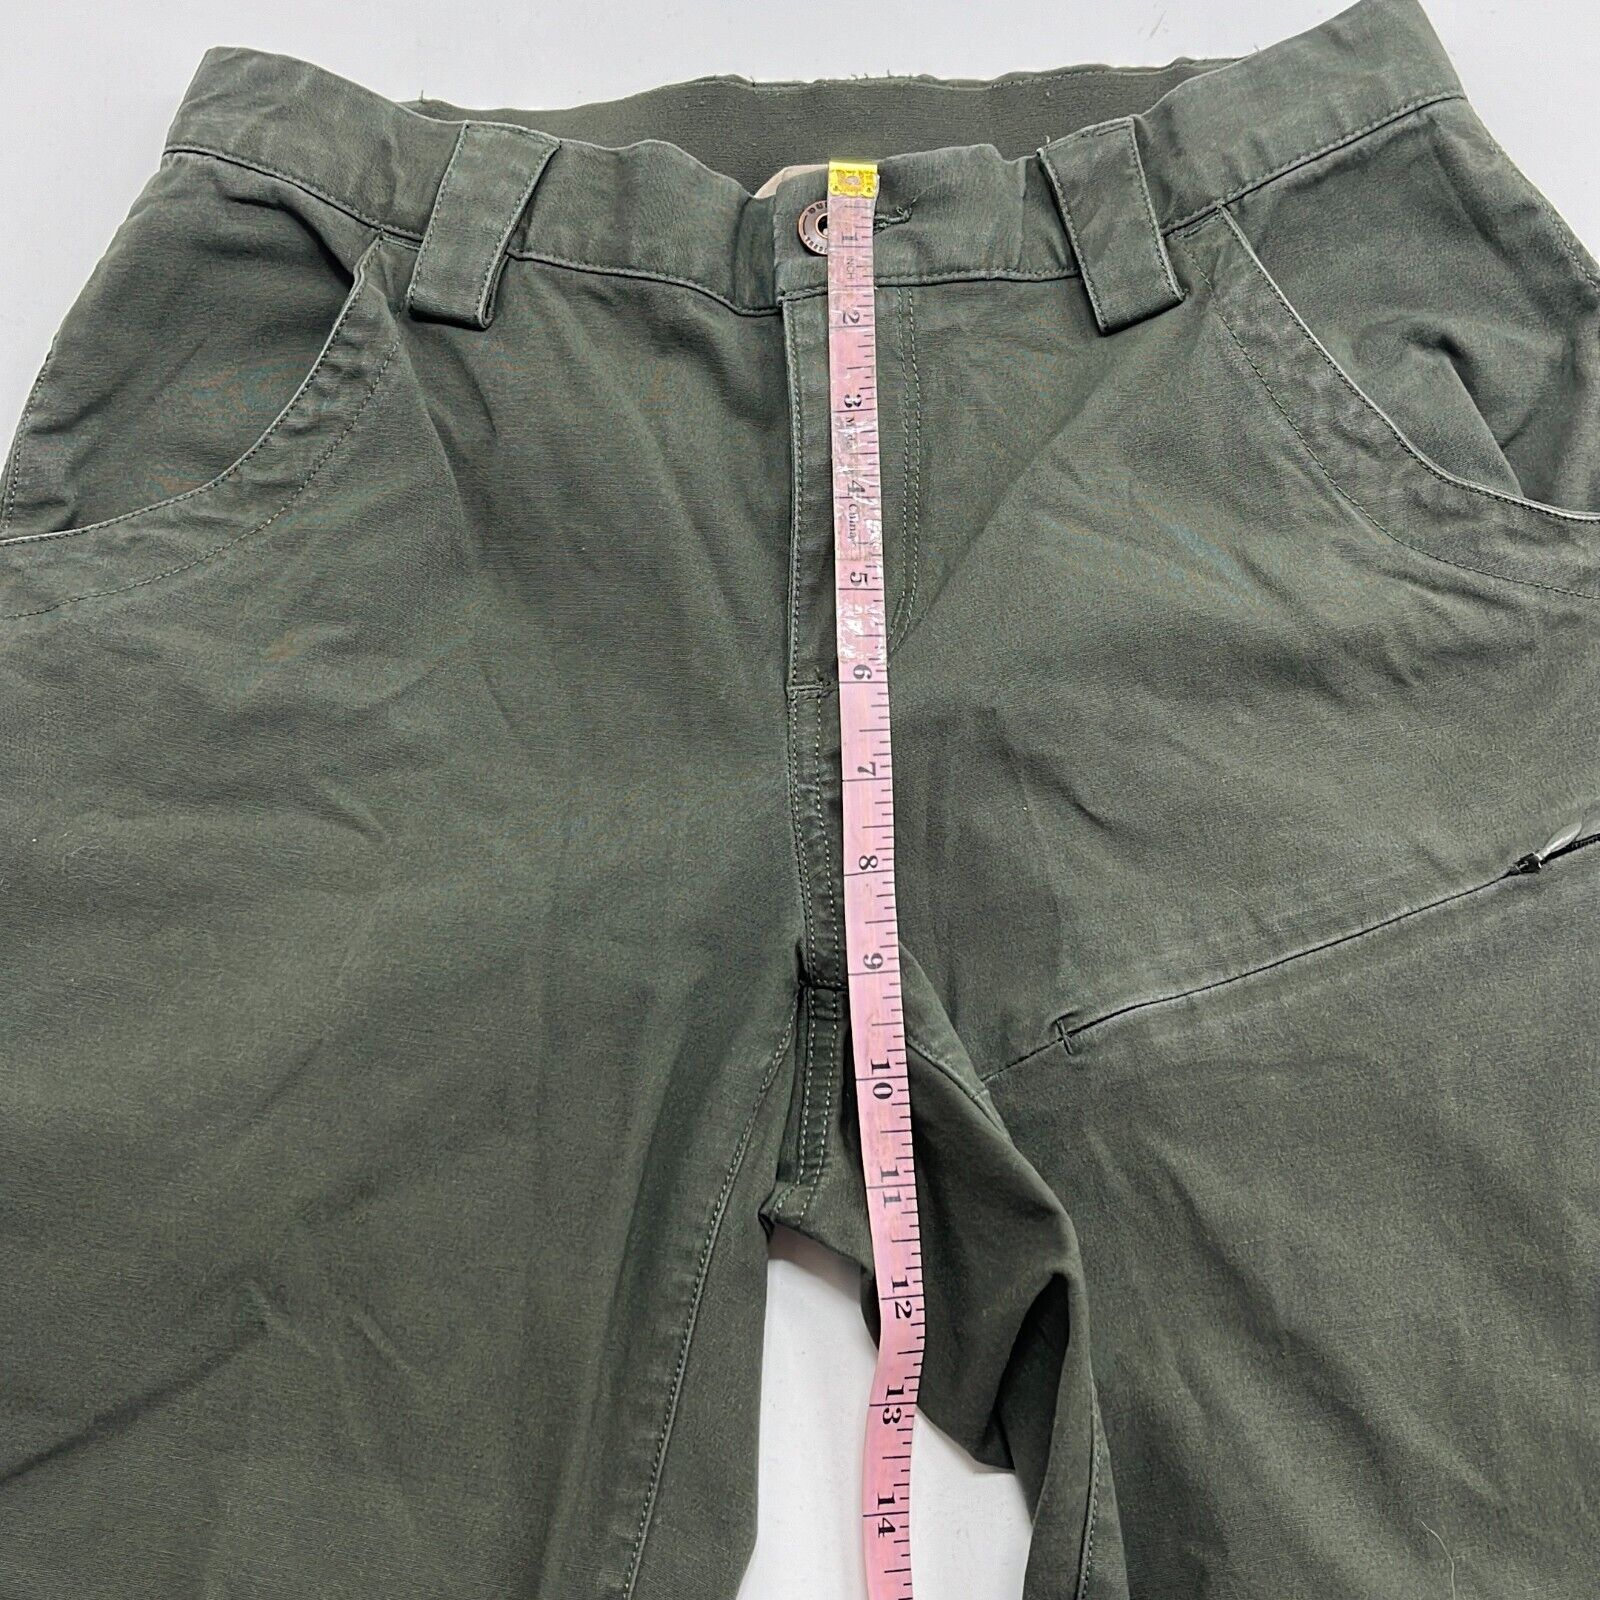 Duluth Trading Co. Women's Green Flat Front Stretch Pockets Capri Pants Size 4